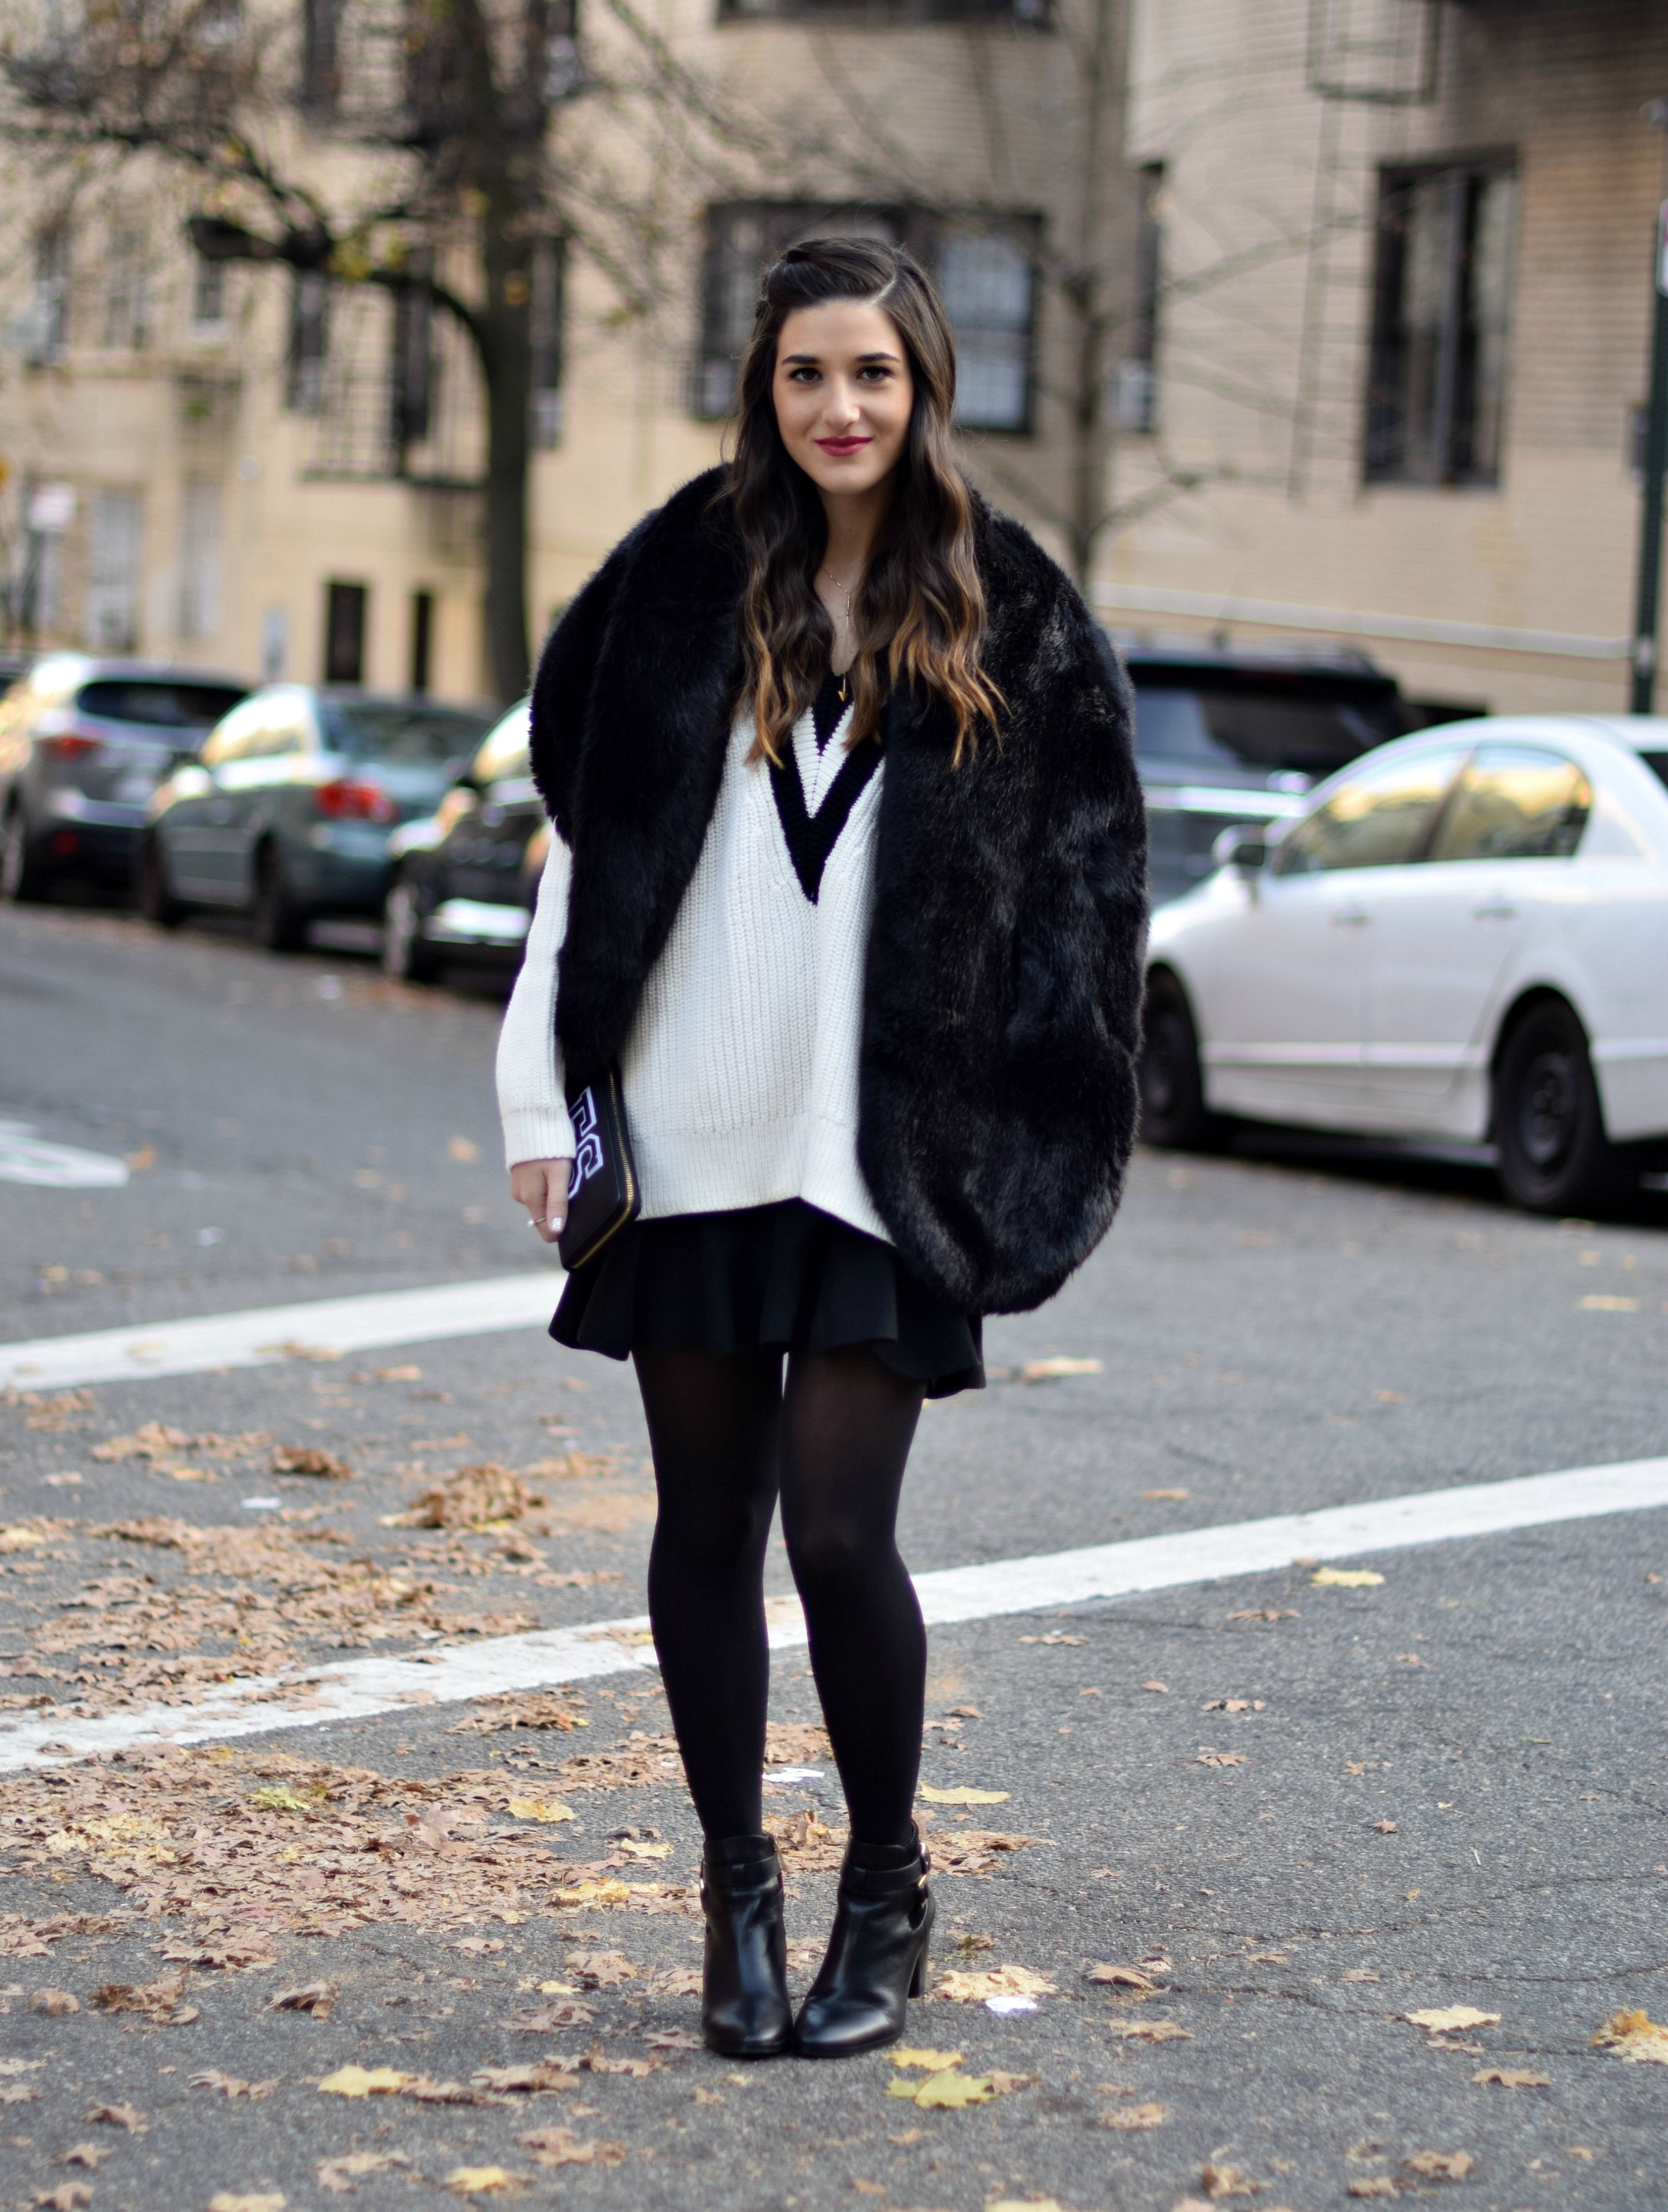 Chunky Varsity Knit Fur Stole Louboutins & Love Fashion Blog Esther Santer NYC Street Style Blogger Sweater Girl Women Photoshoot Model Shoes Black Booties Louise et Cie Nordstrom Hair Swag H&M Mini Skirt Outfit OOTD Neutral Winter  Wear Tights Shop.jpg